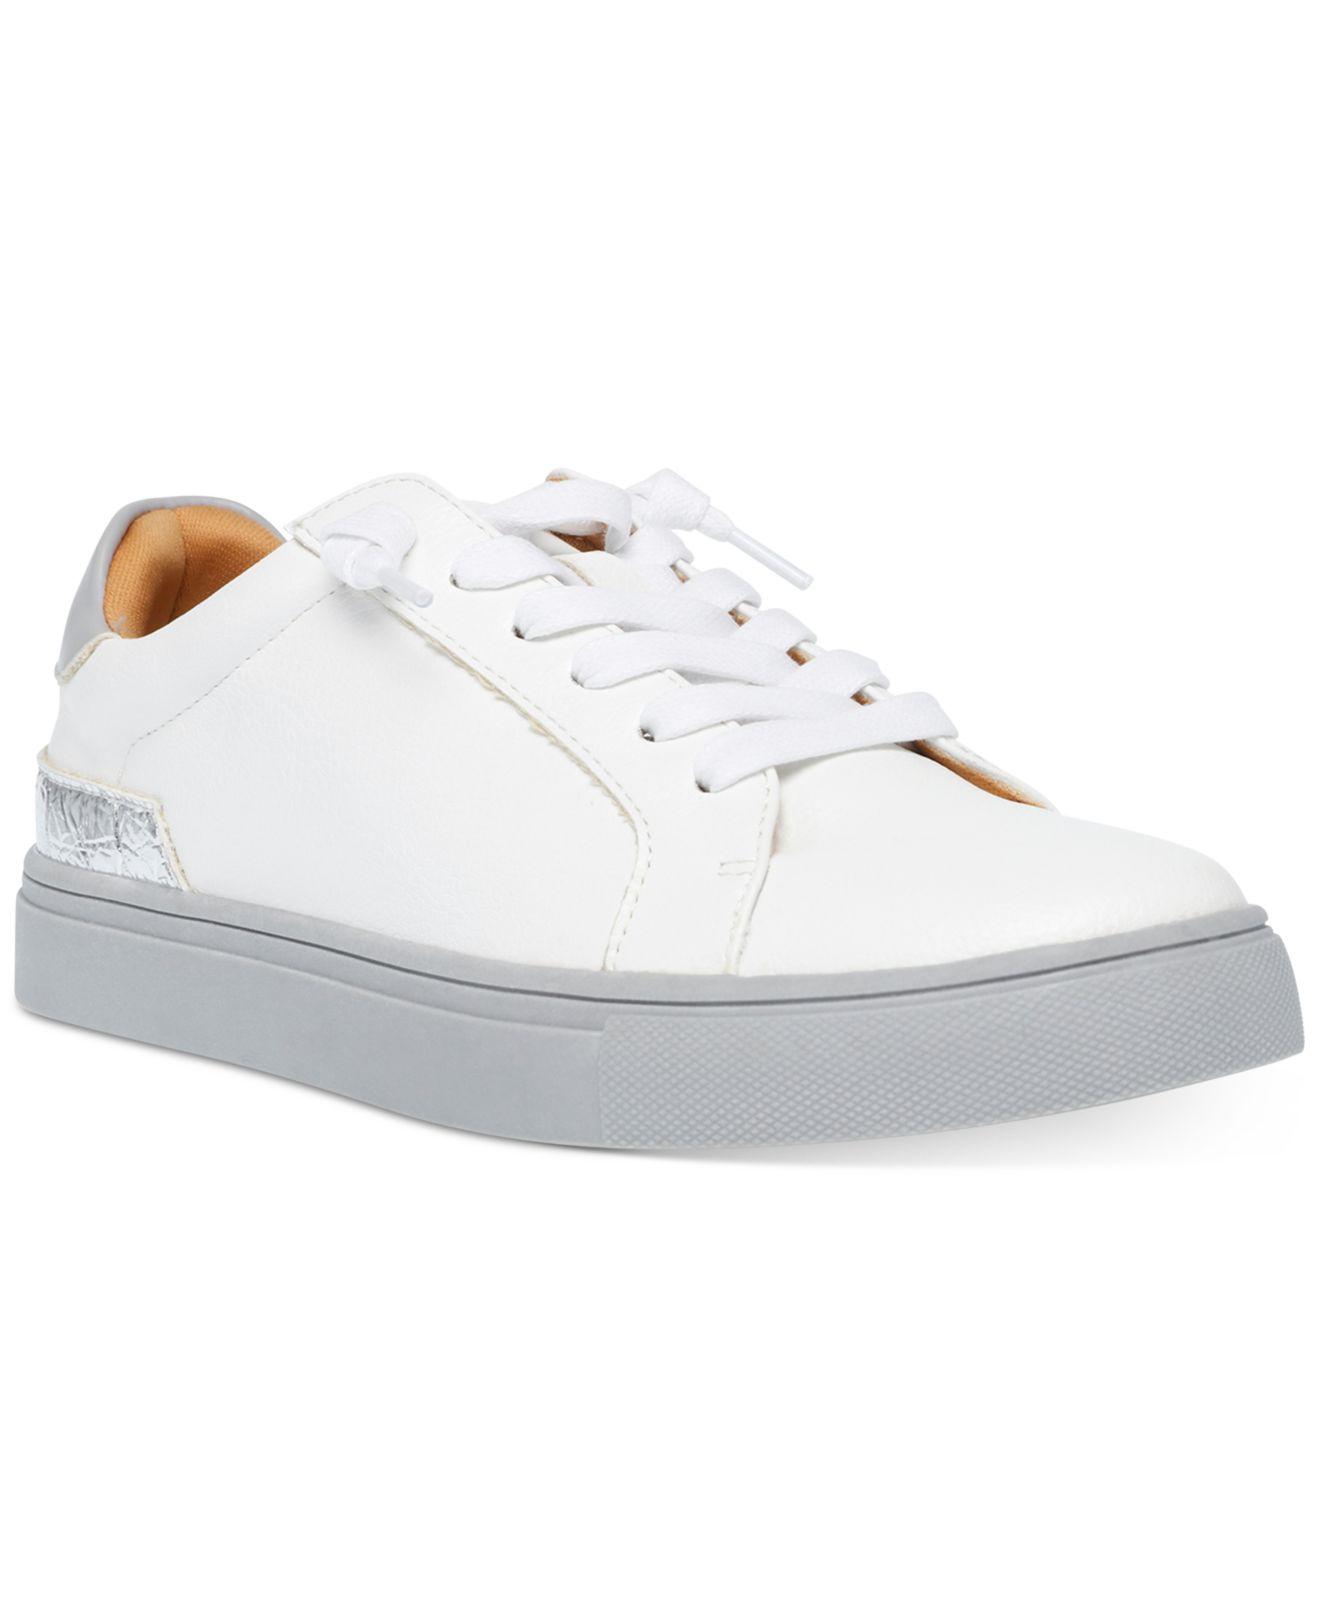 DV by Dolce Vita Abigale Lace-up Sneakers in White | Lyst